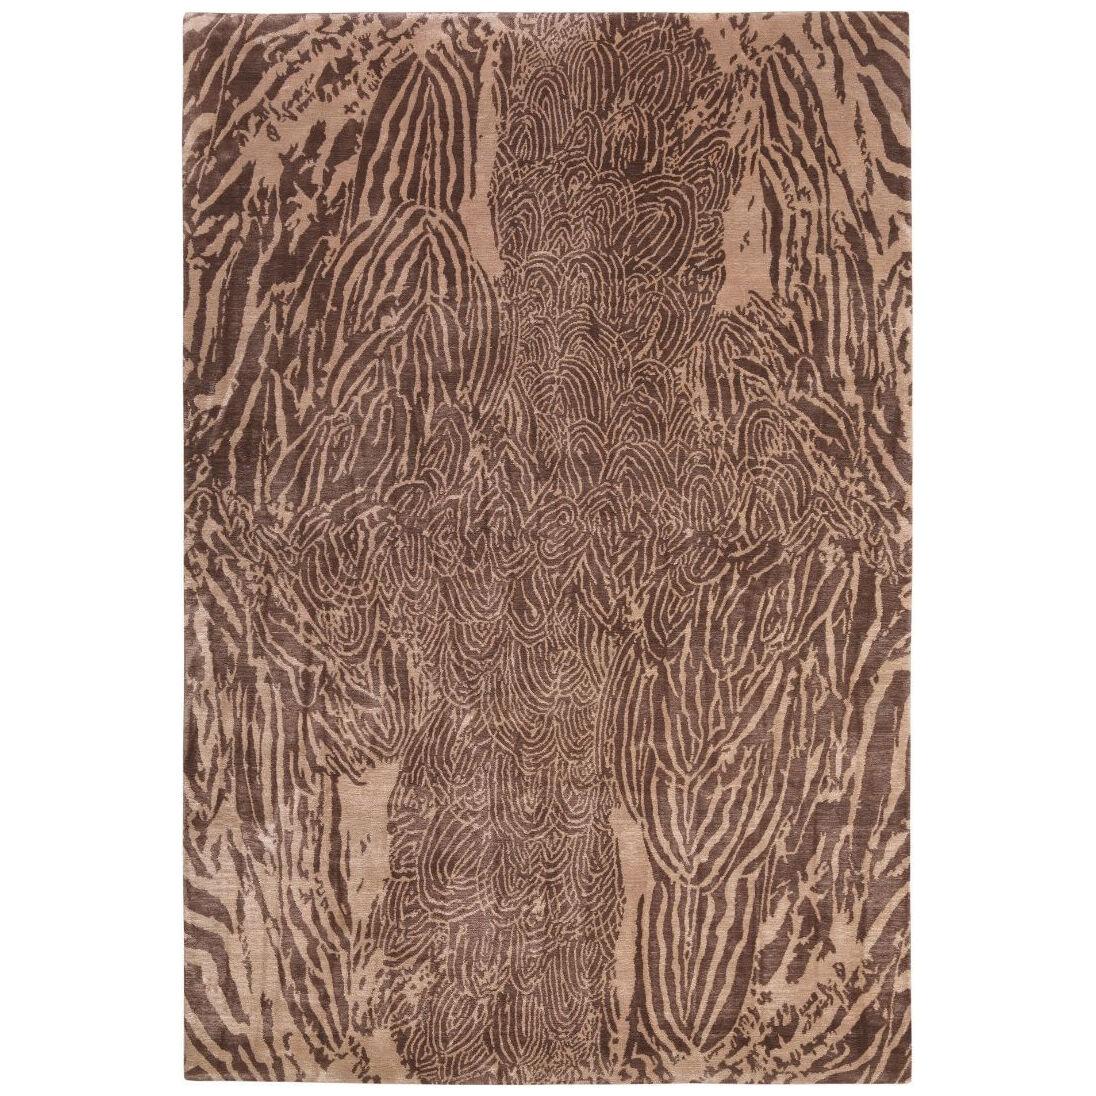 Hand Woven Alexander McQueen, "Feathers", Silk Blend Large Area Rug